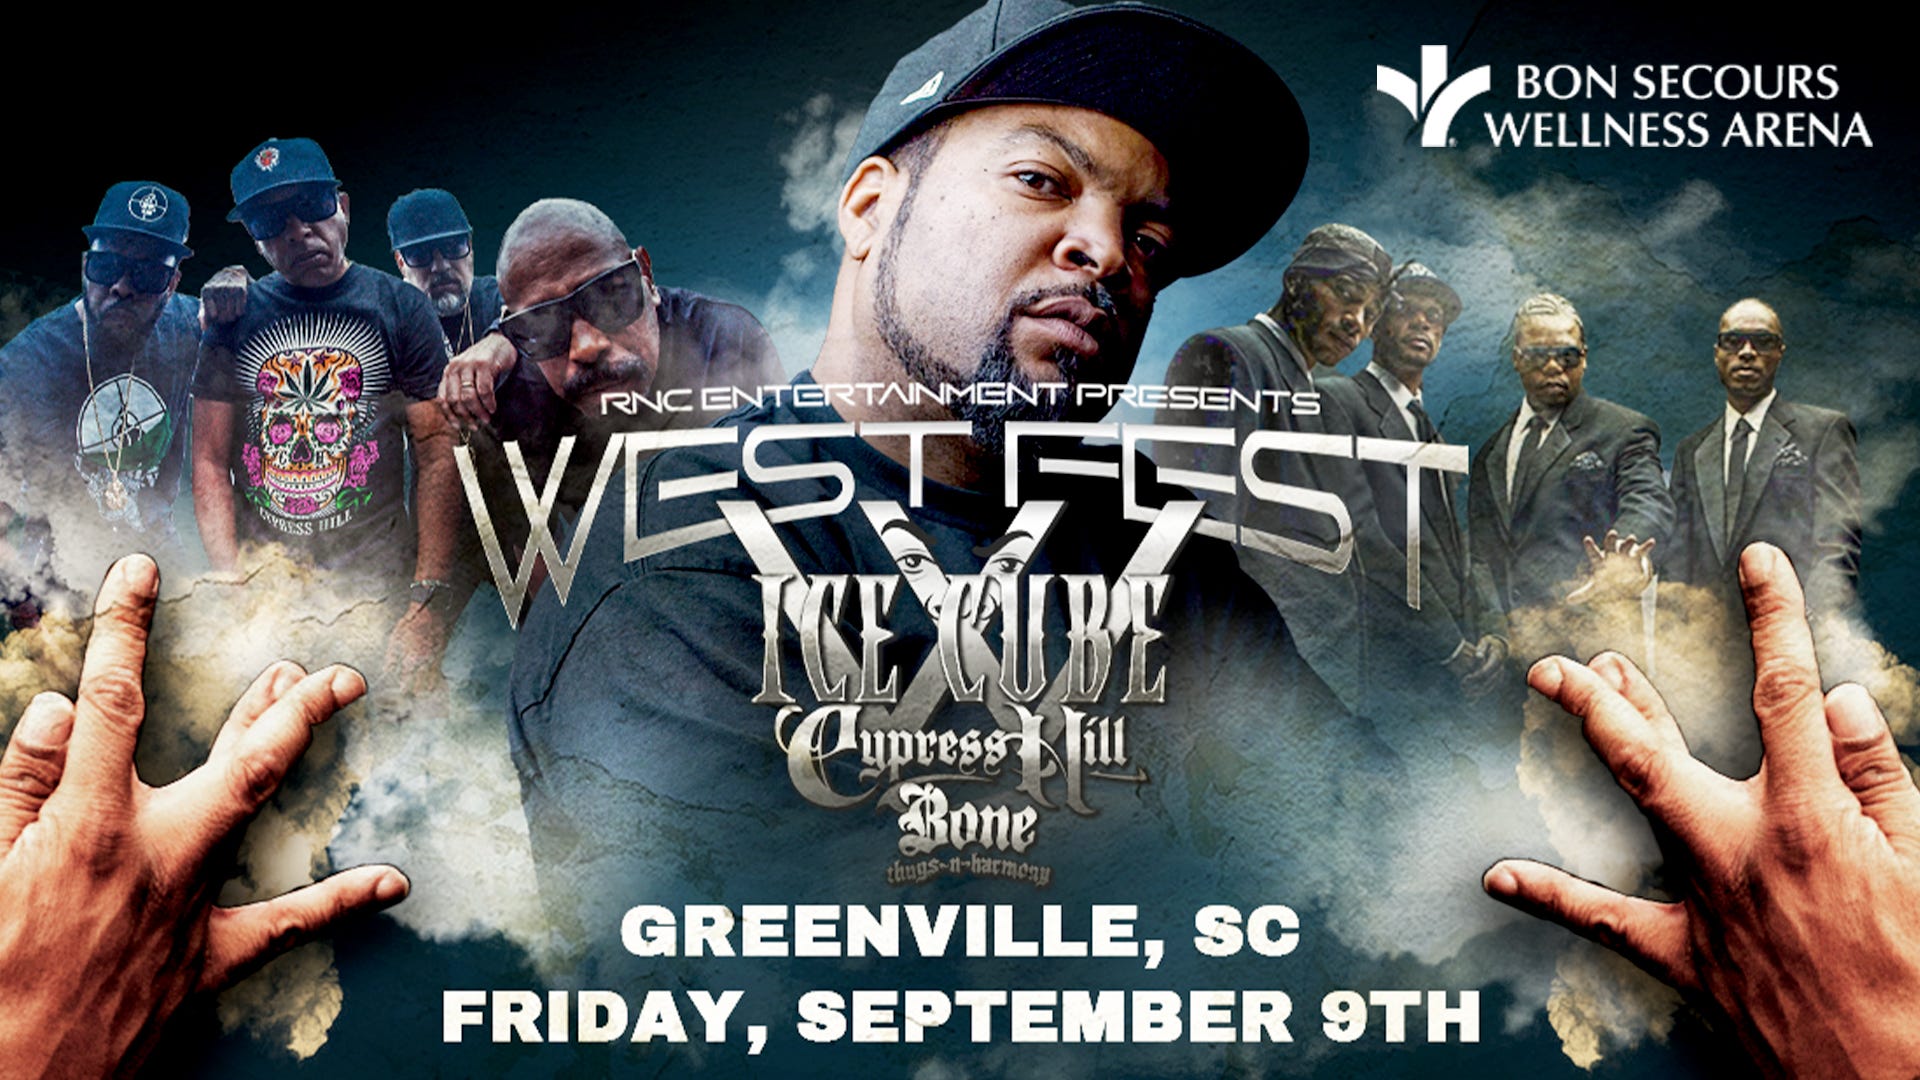 Ice Cube, Cypress Hill, and Bоne Thugs-N-Harmony Concert Canceled in Greenville